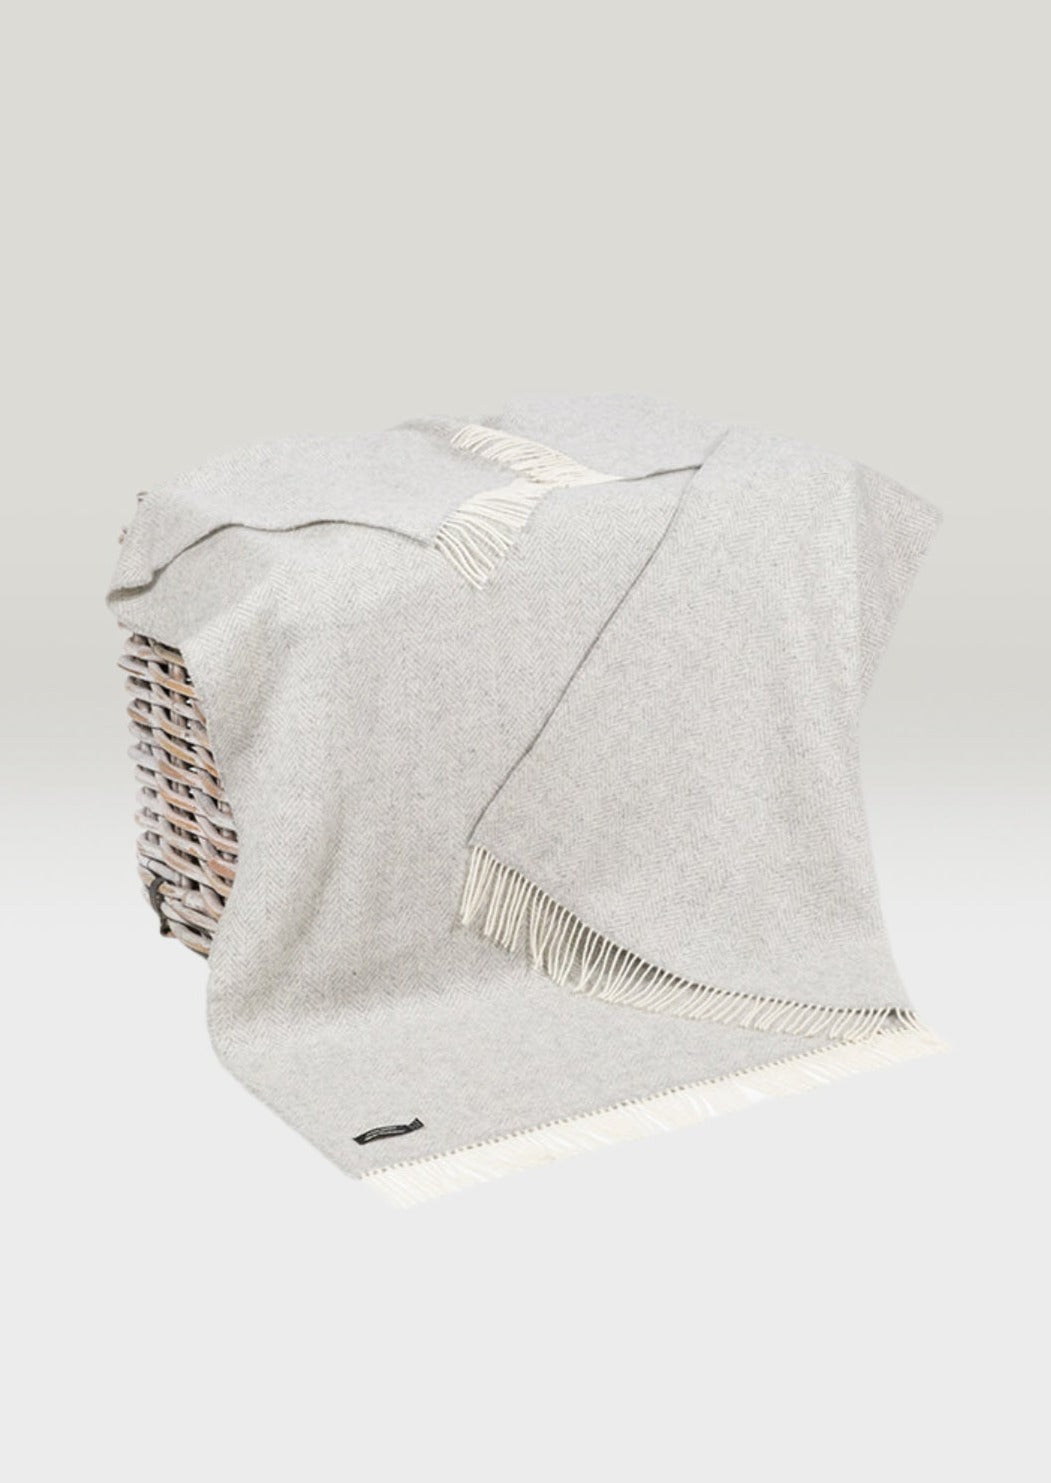 John Hanly Oversized Cashmere Throw - Pale Grey